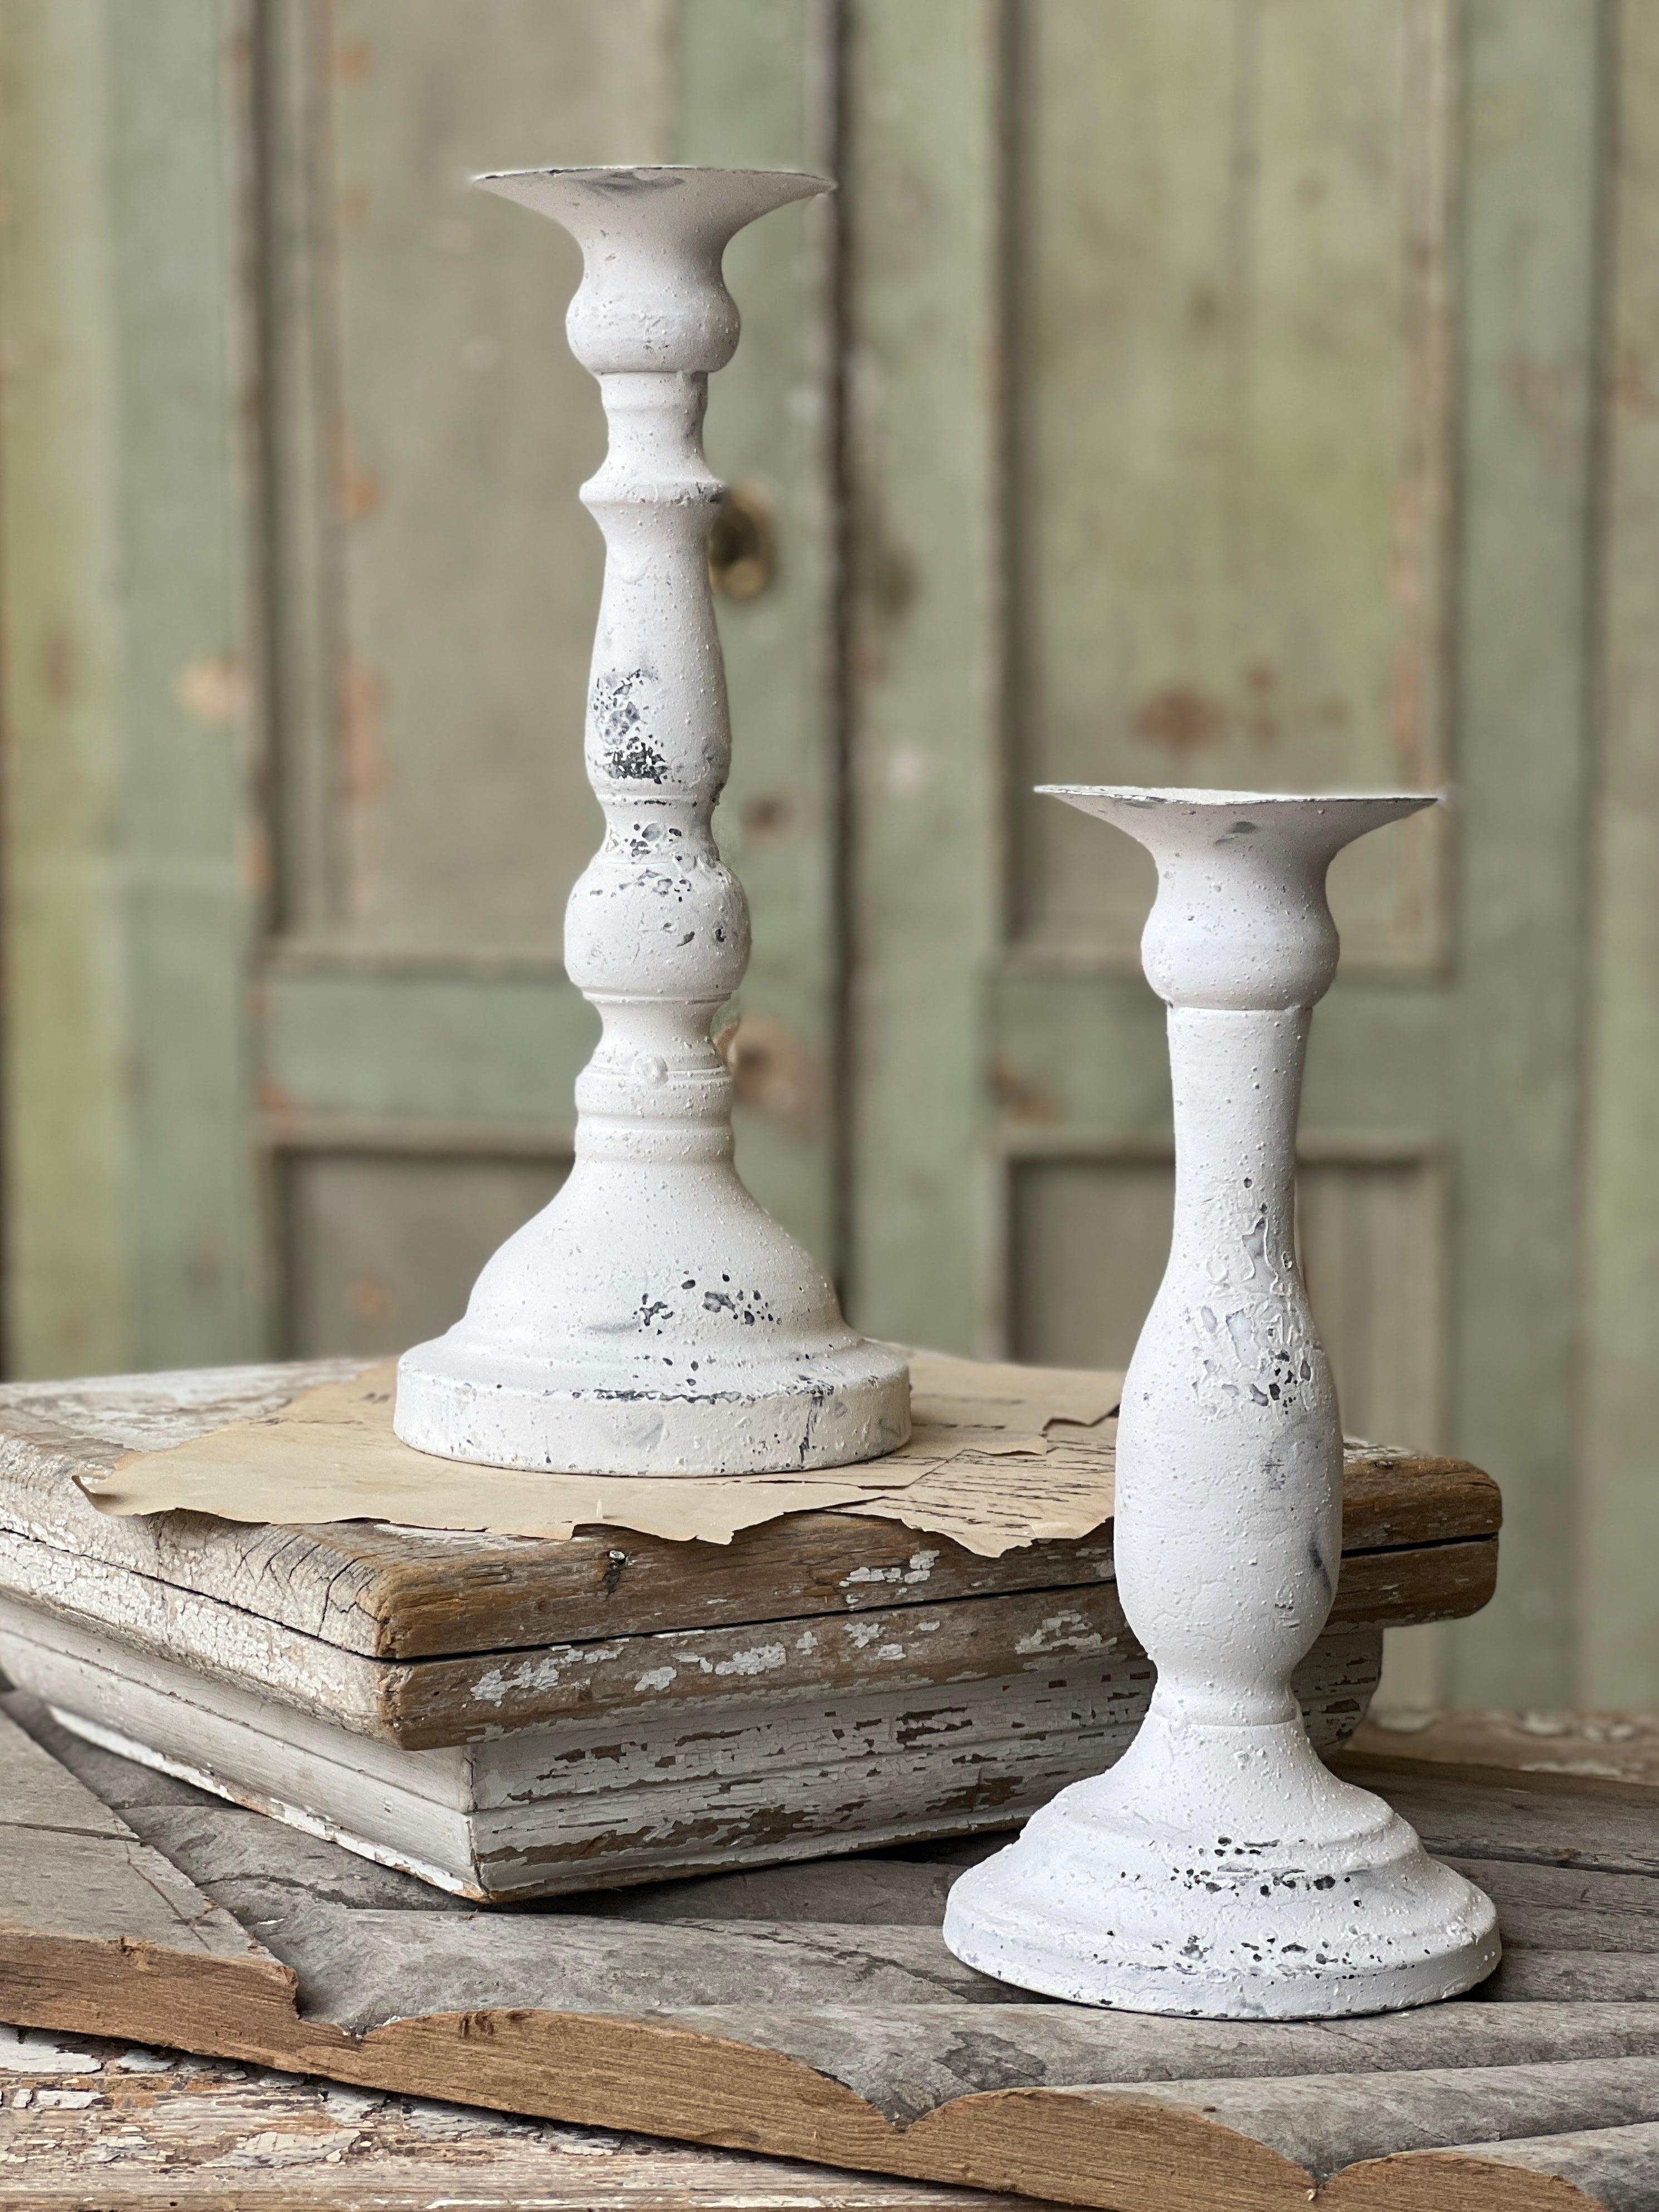 White Rustic Candle Holders for Pillar Candles,18-Inch Vintage Wooden  Candle Holders Pillar,Candle Holders for Candlesticks,Farmhouse Style  Accent